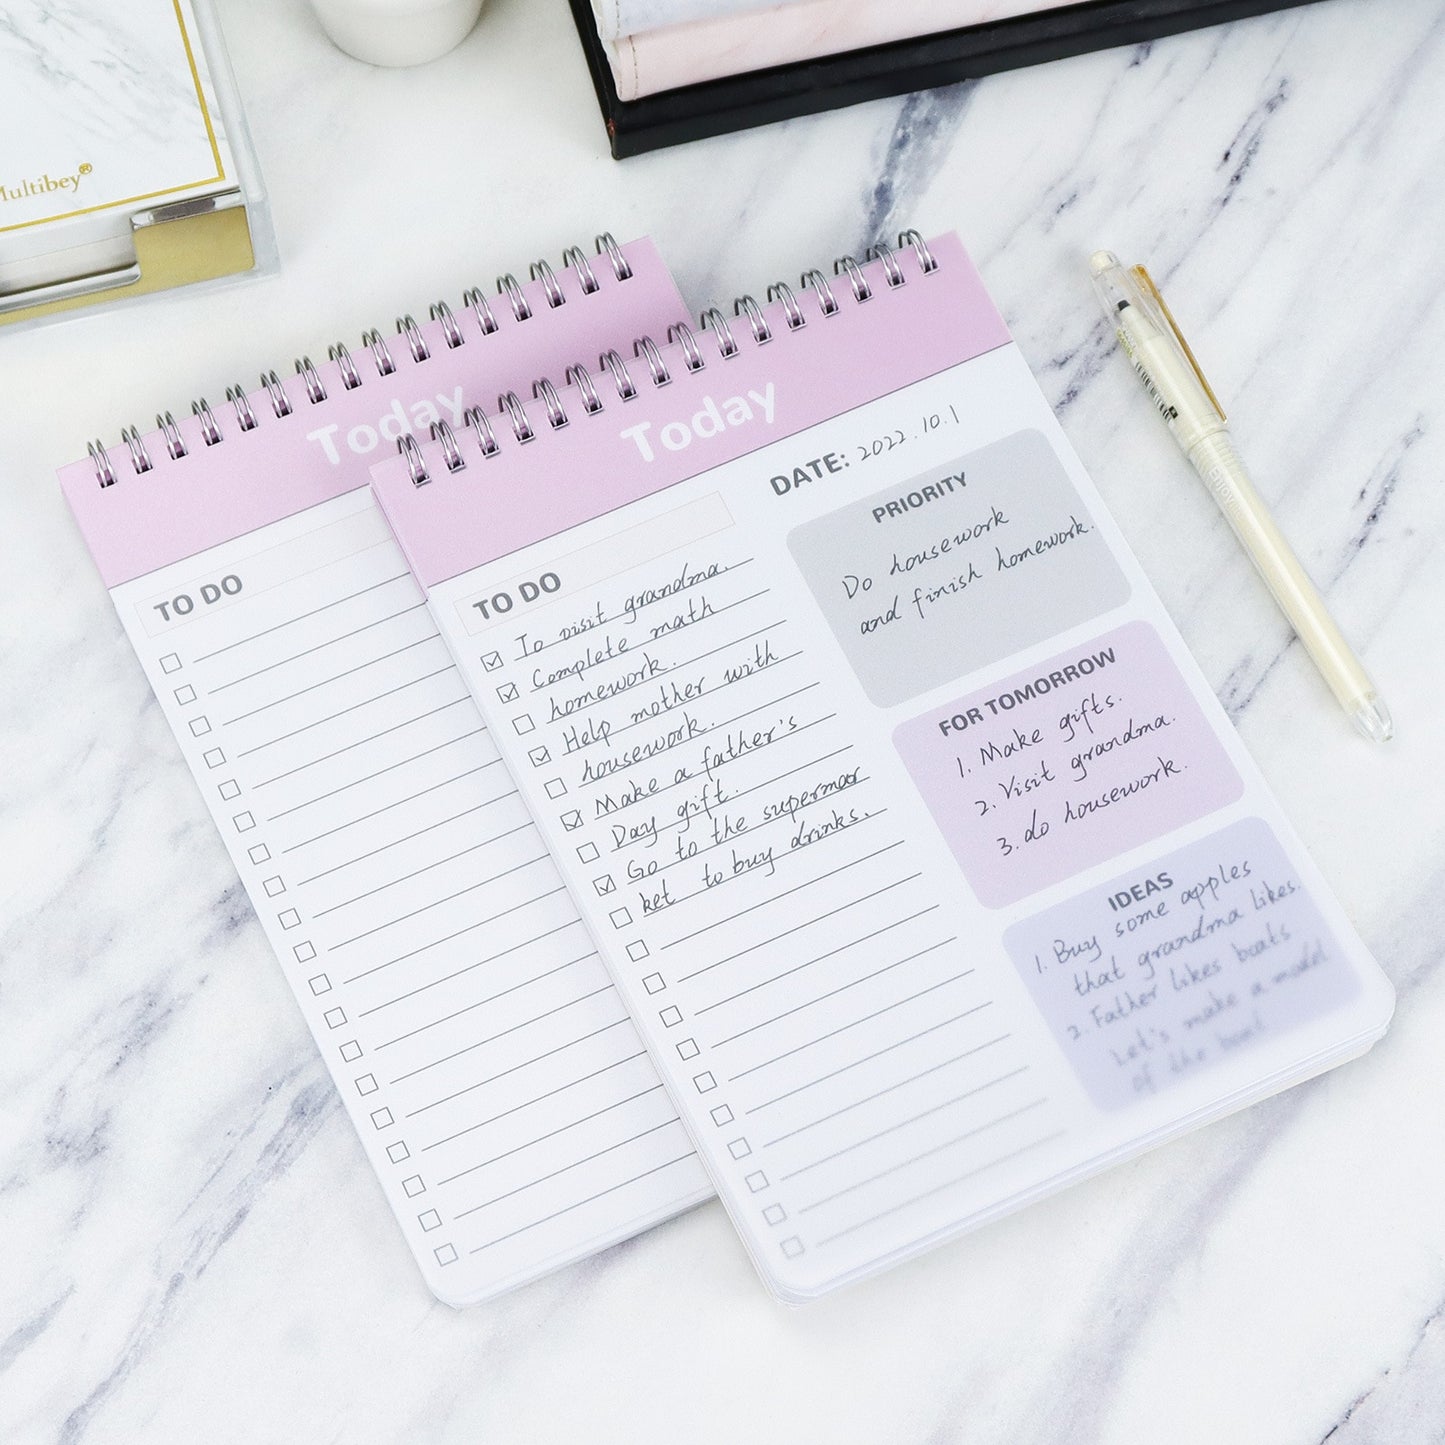 Today's Daily Planner and To Do List Notepad with Transparent Cover Page